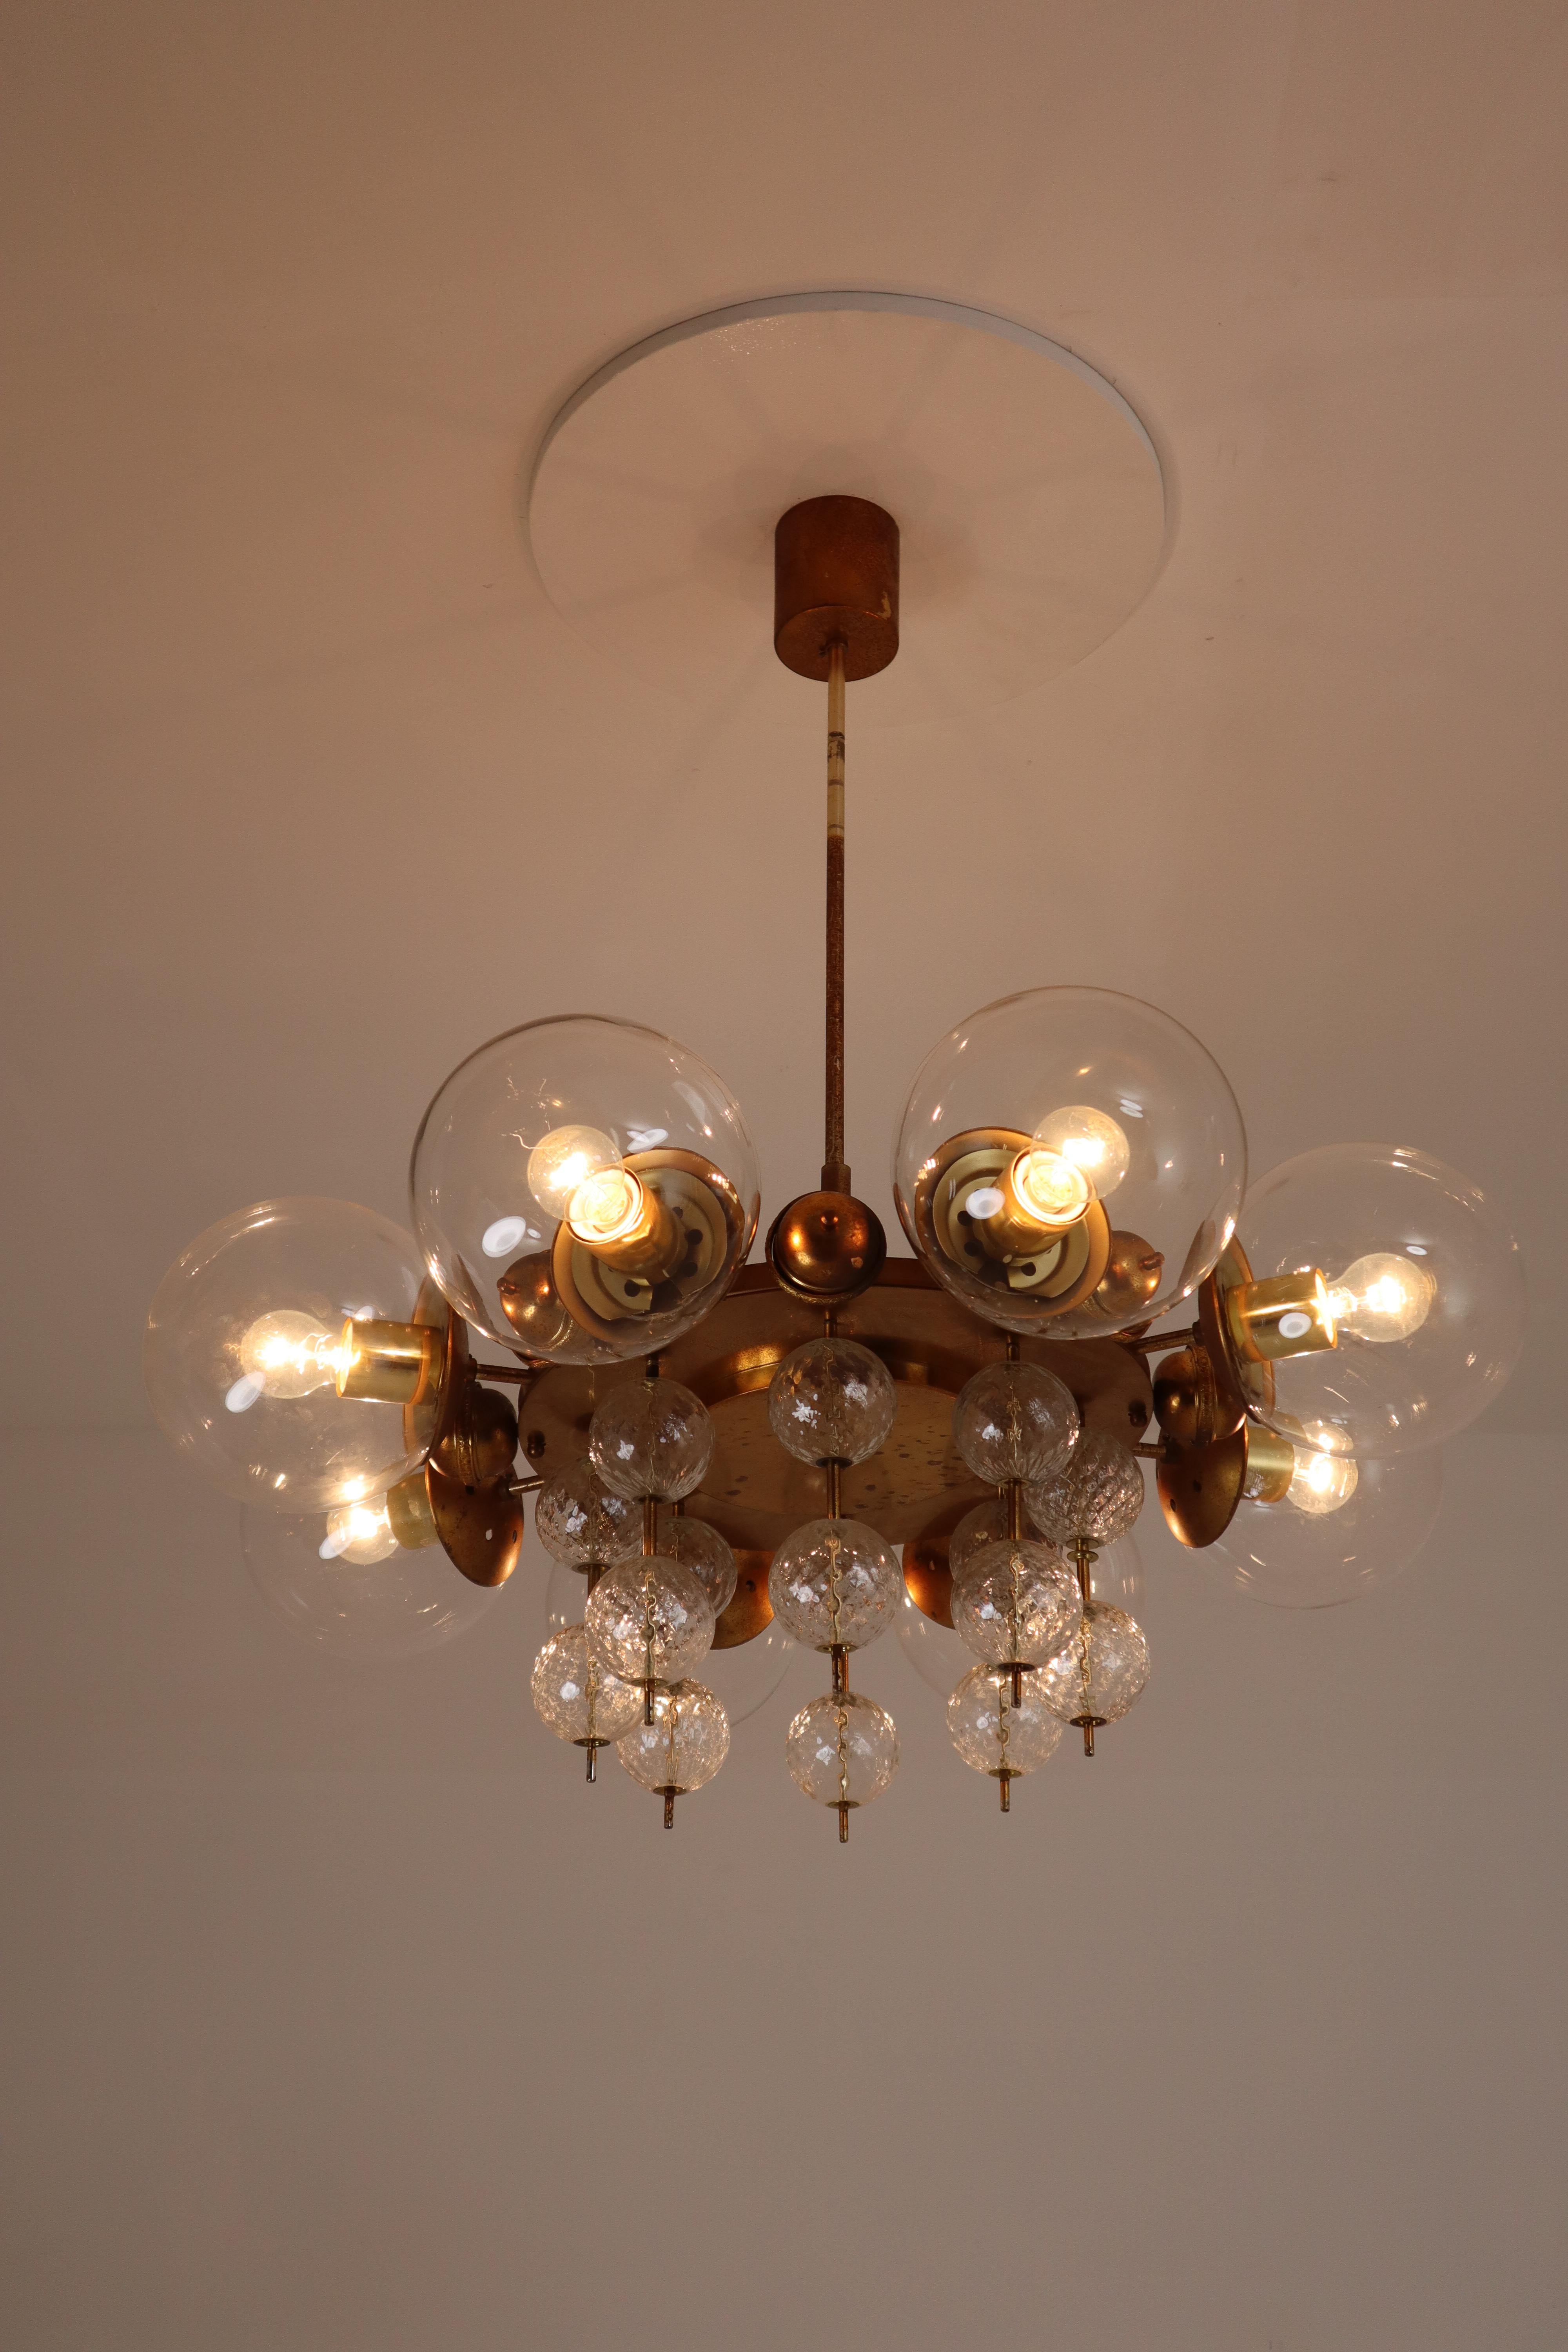 Set of brass chandeliers was produced in Europe in the 1950s. A spirited and chic design set chandeliers with brass fixture and handblown glass. The chandelier with brass frame consist of eight lights, formed in a circle, with glass shades. The